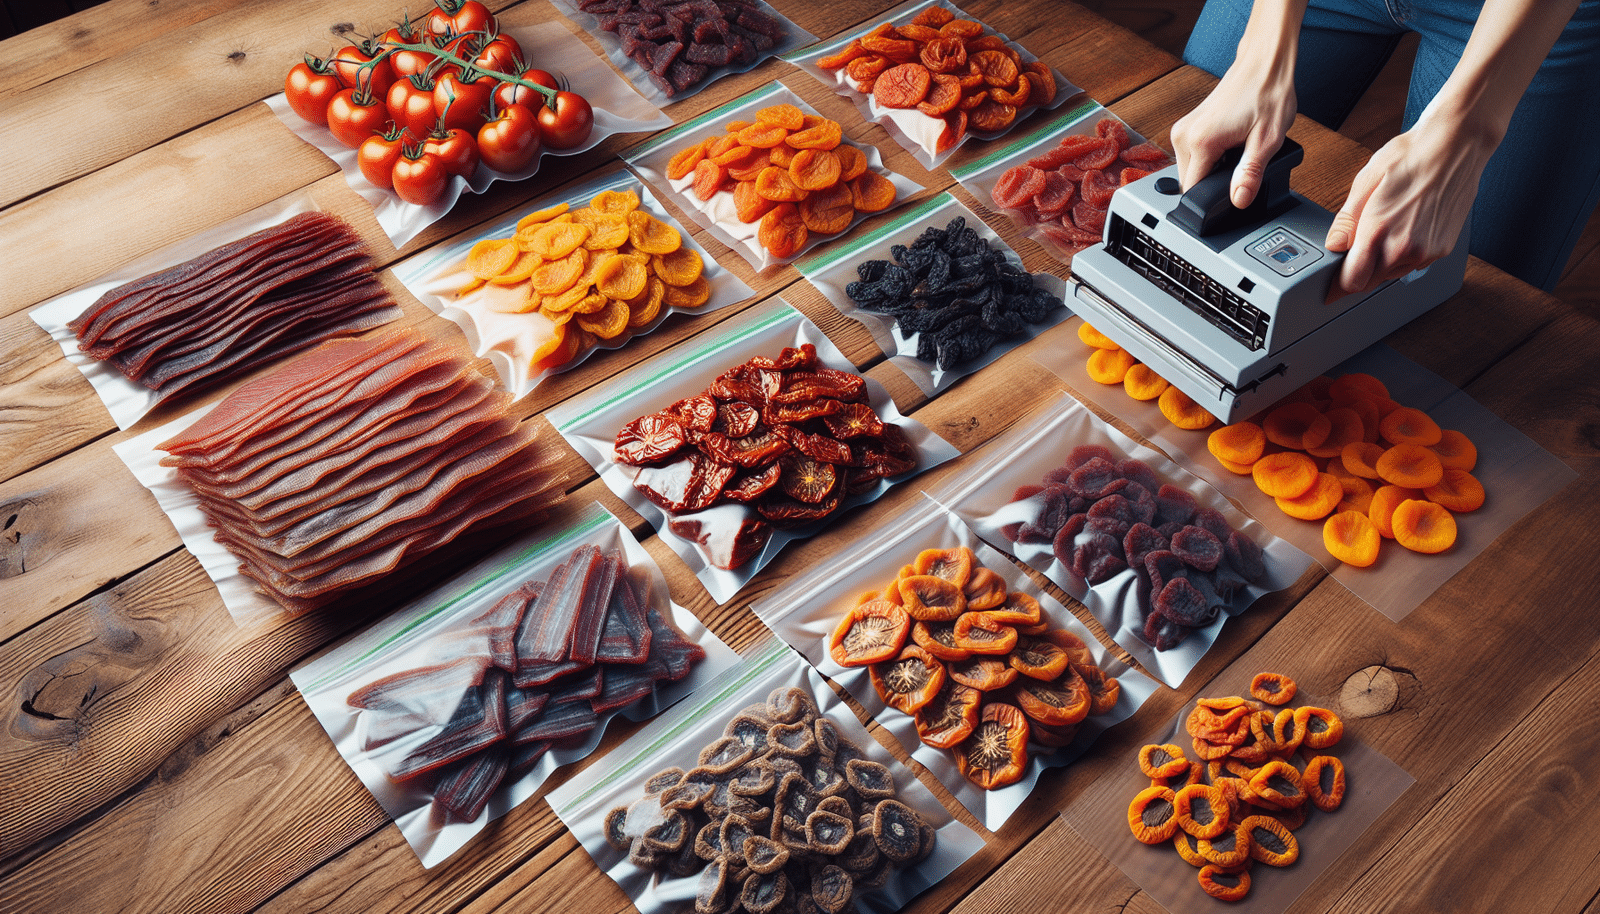 Vacuum sealing different types of dehydrated foods